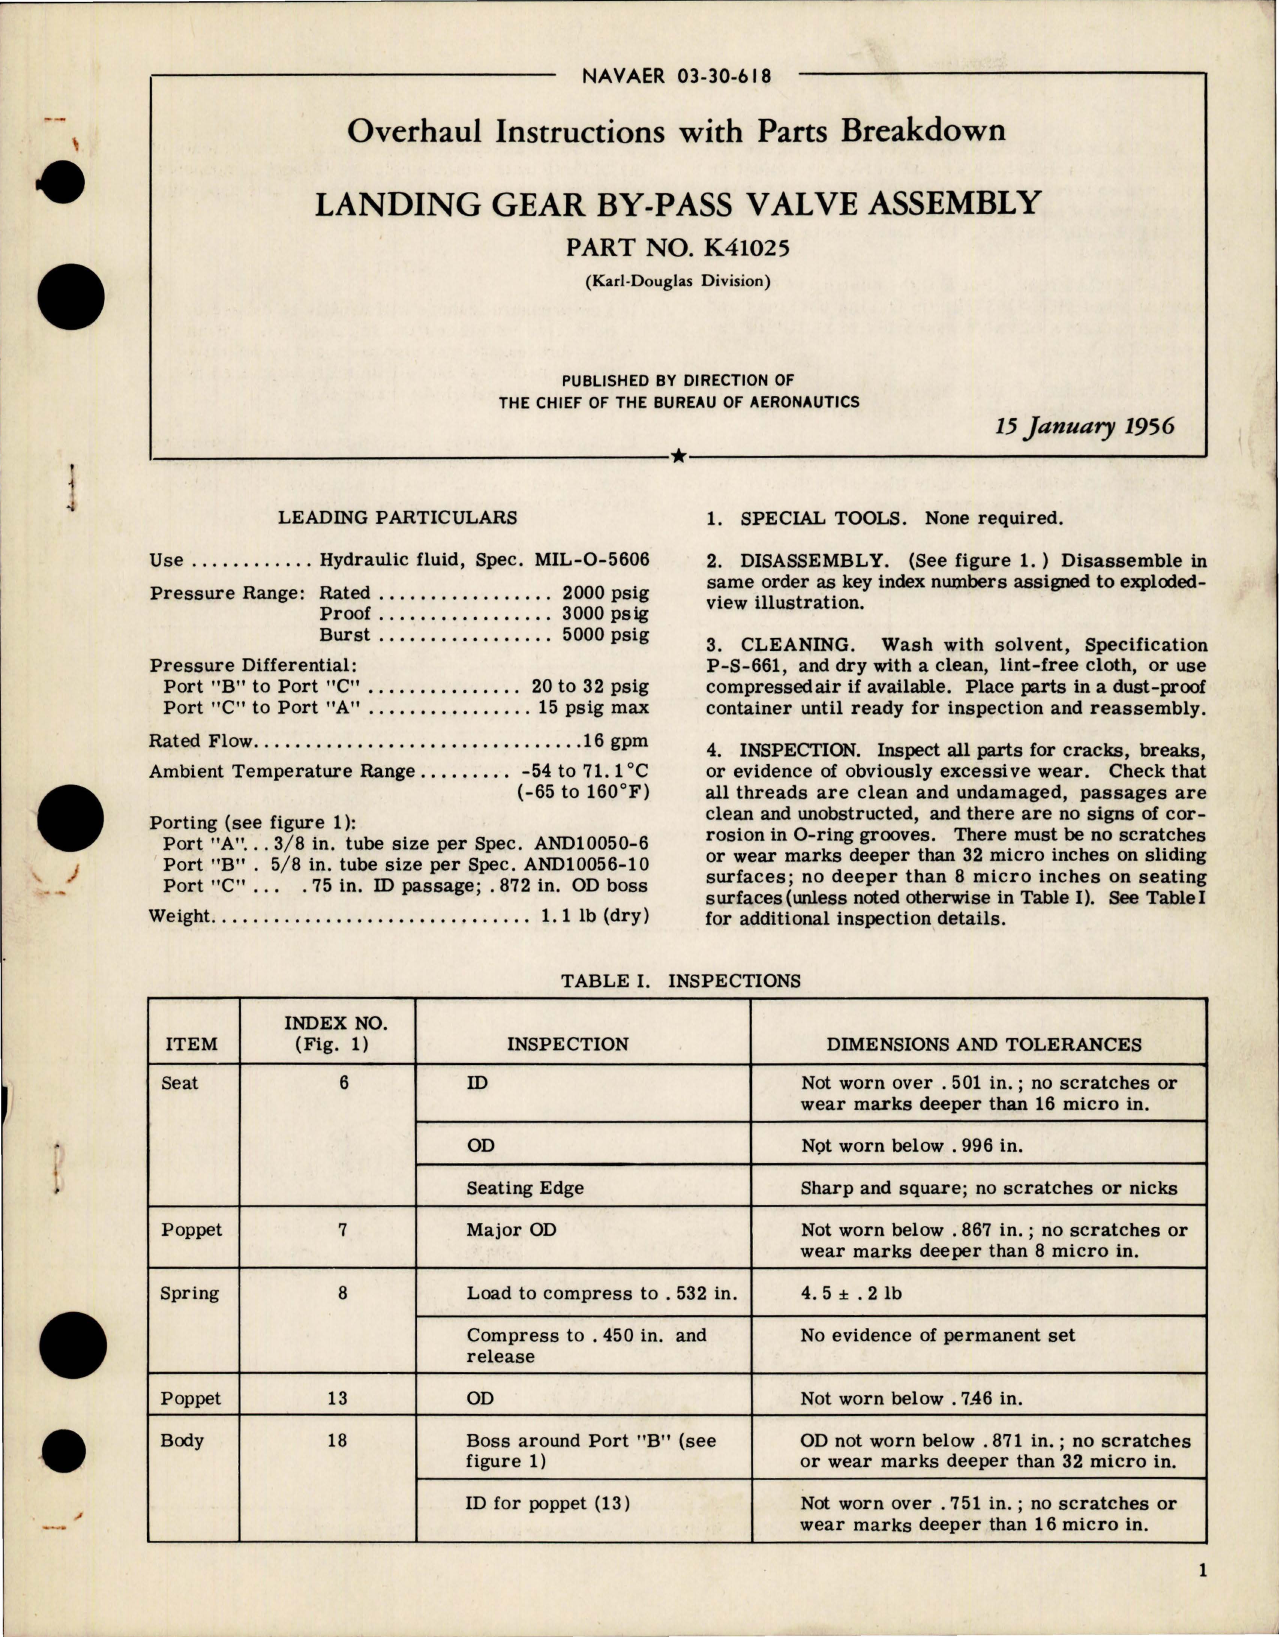 Sample page 1 from AirCorps Library document: Overhaul Instructions with Parts for Landing Gear By-Pass Valve Assembly - Part K41025 